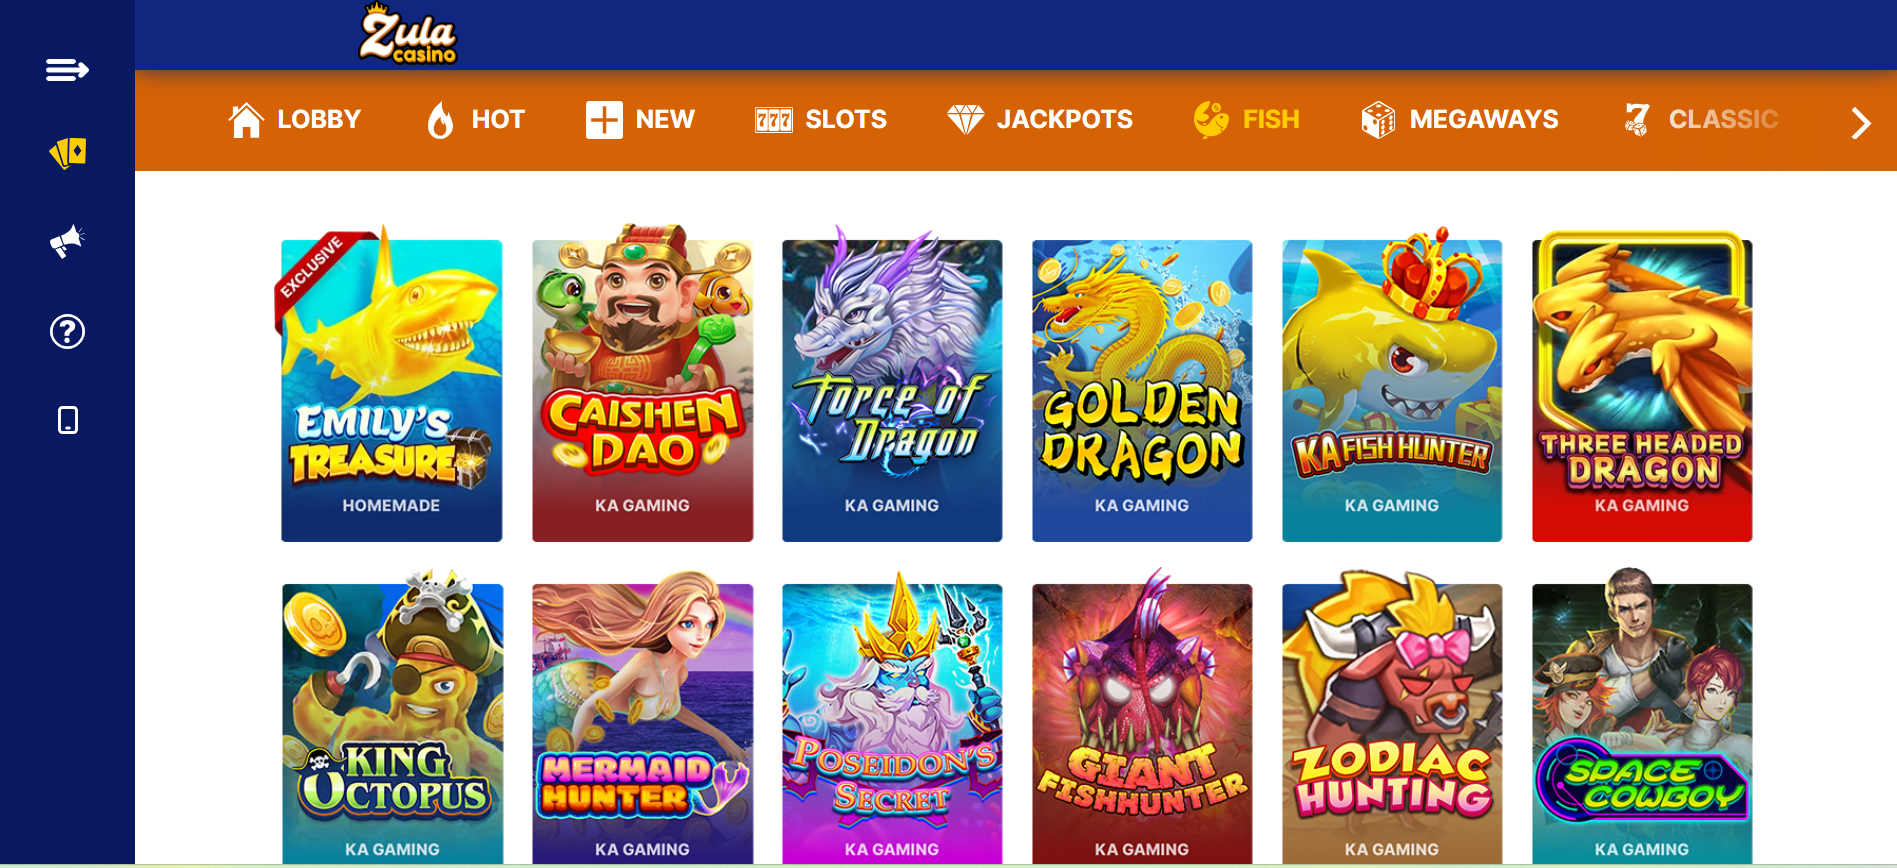 Zula Casino Puts Fish Games In The Spring Spotlight: Get Free Sweeps Coins To Play Fish Table Games